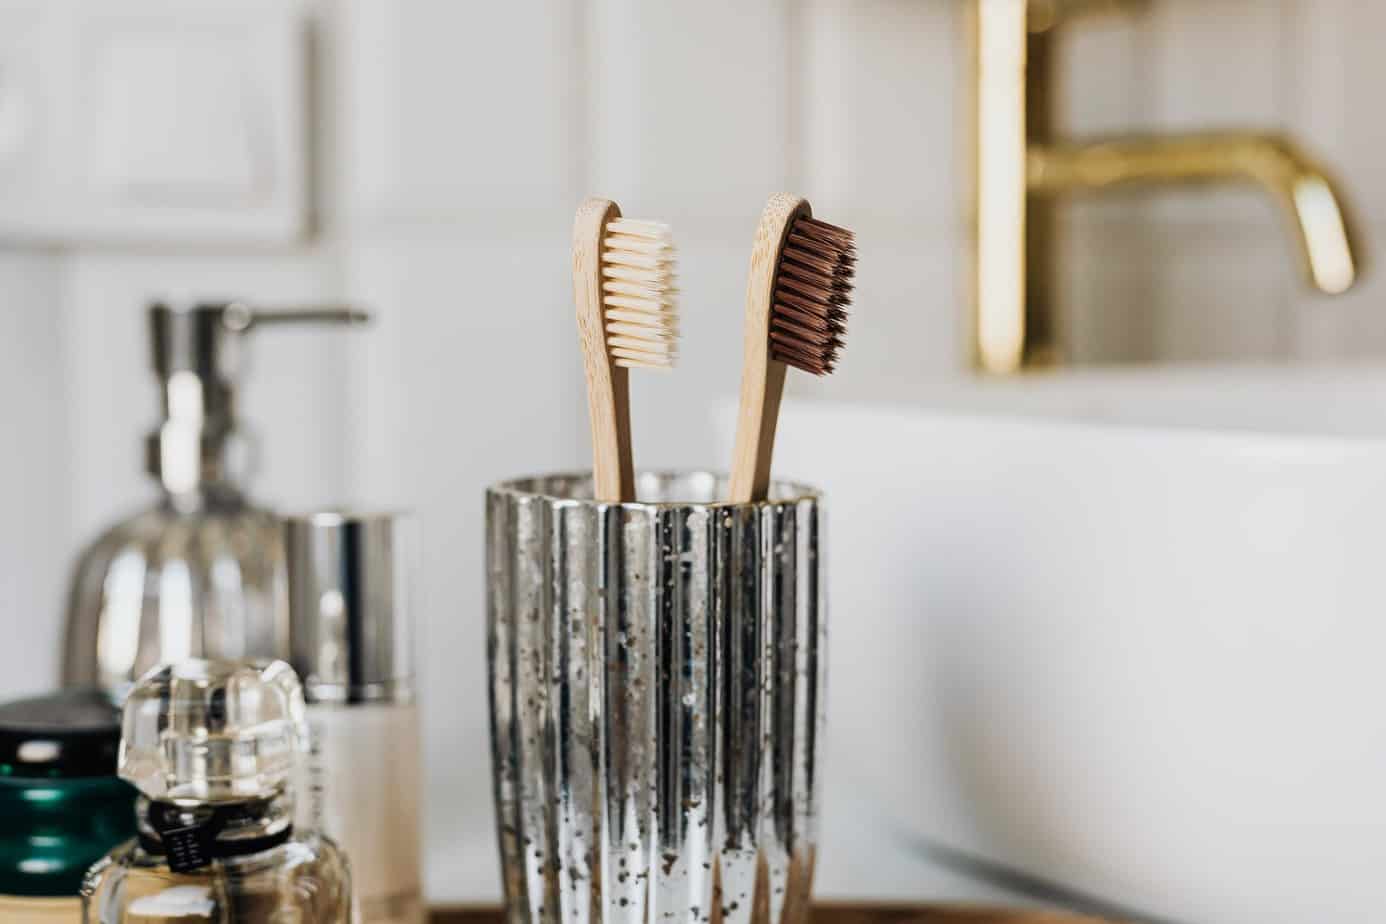 6 Practical bathroom swaps for sustainable living | bamboo toothbrushes in glass in a stylish bathroom